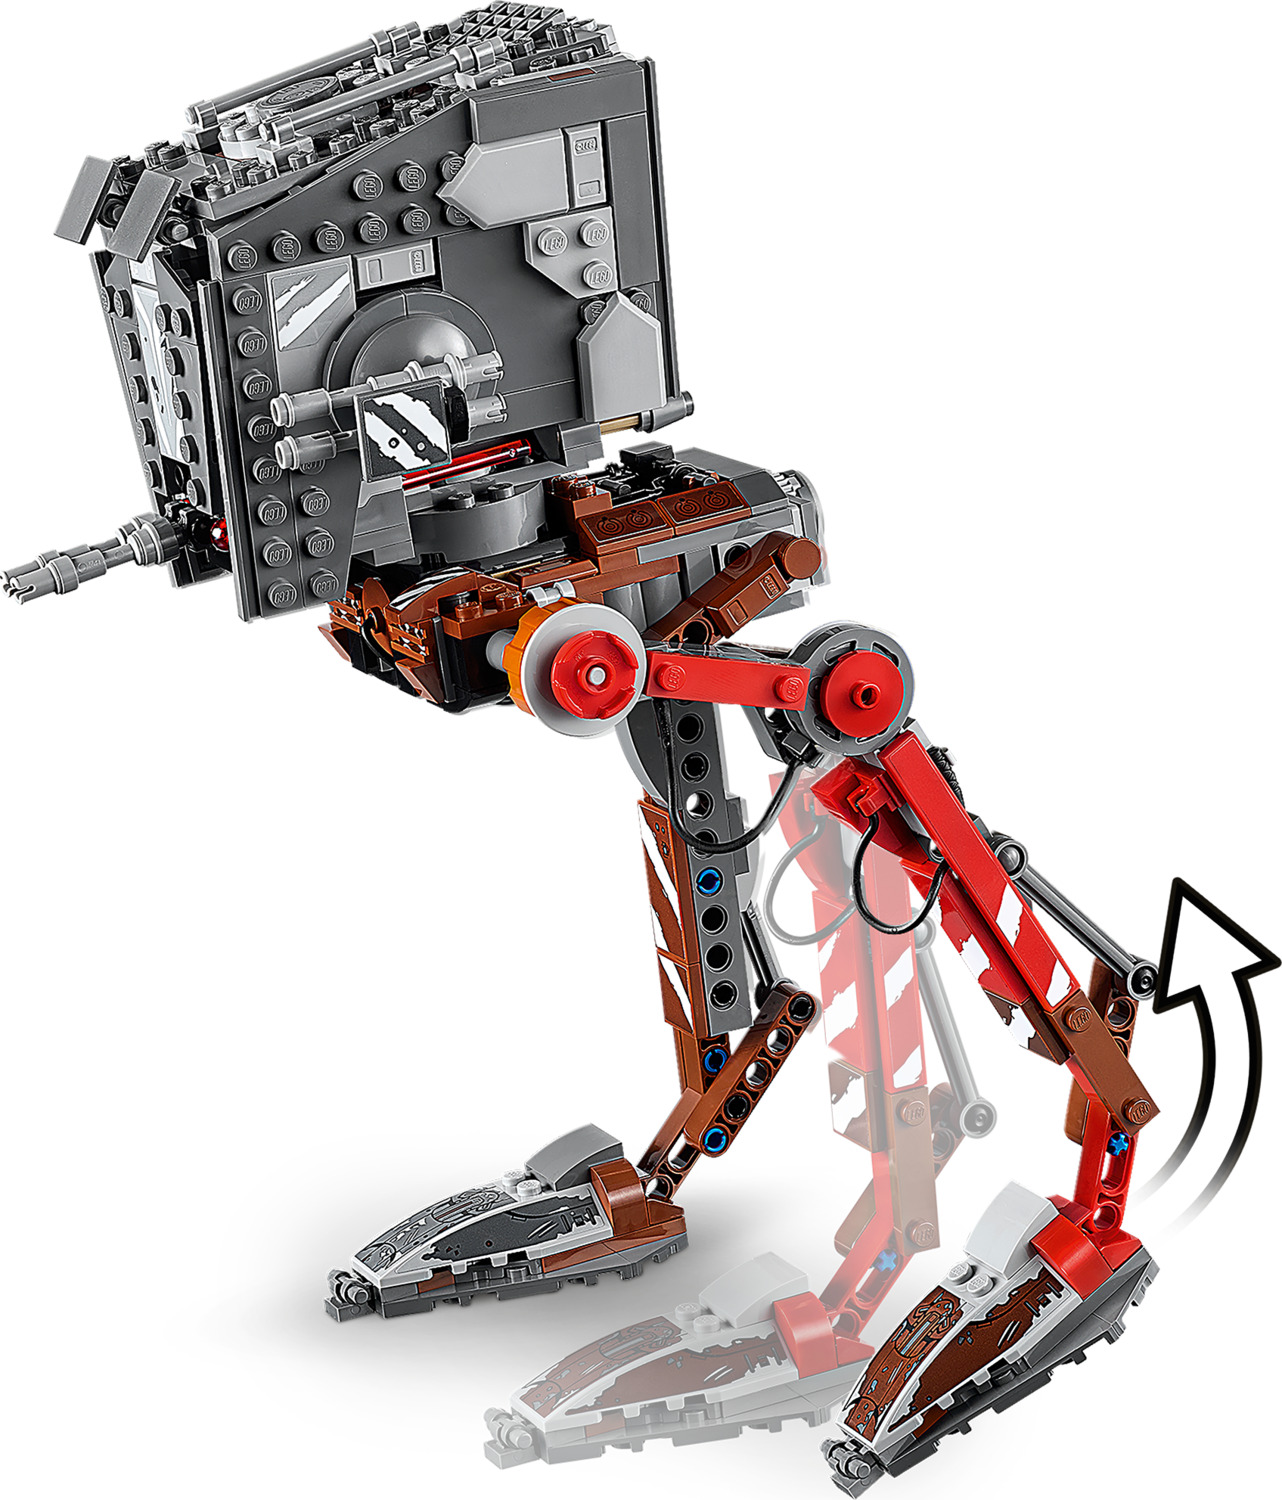 Tag et bad rutine Rytmisk LEGO Star Wars: AT-ST Raider from The Mandalorian - Givens Books and Little  Dickens